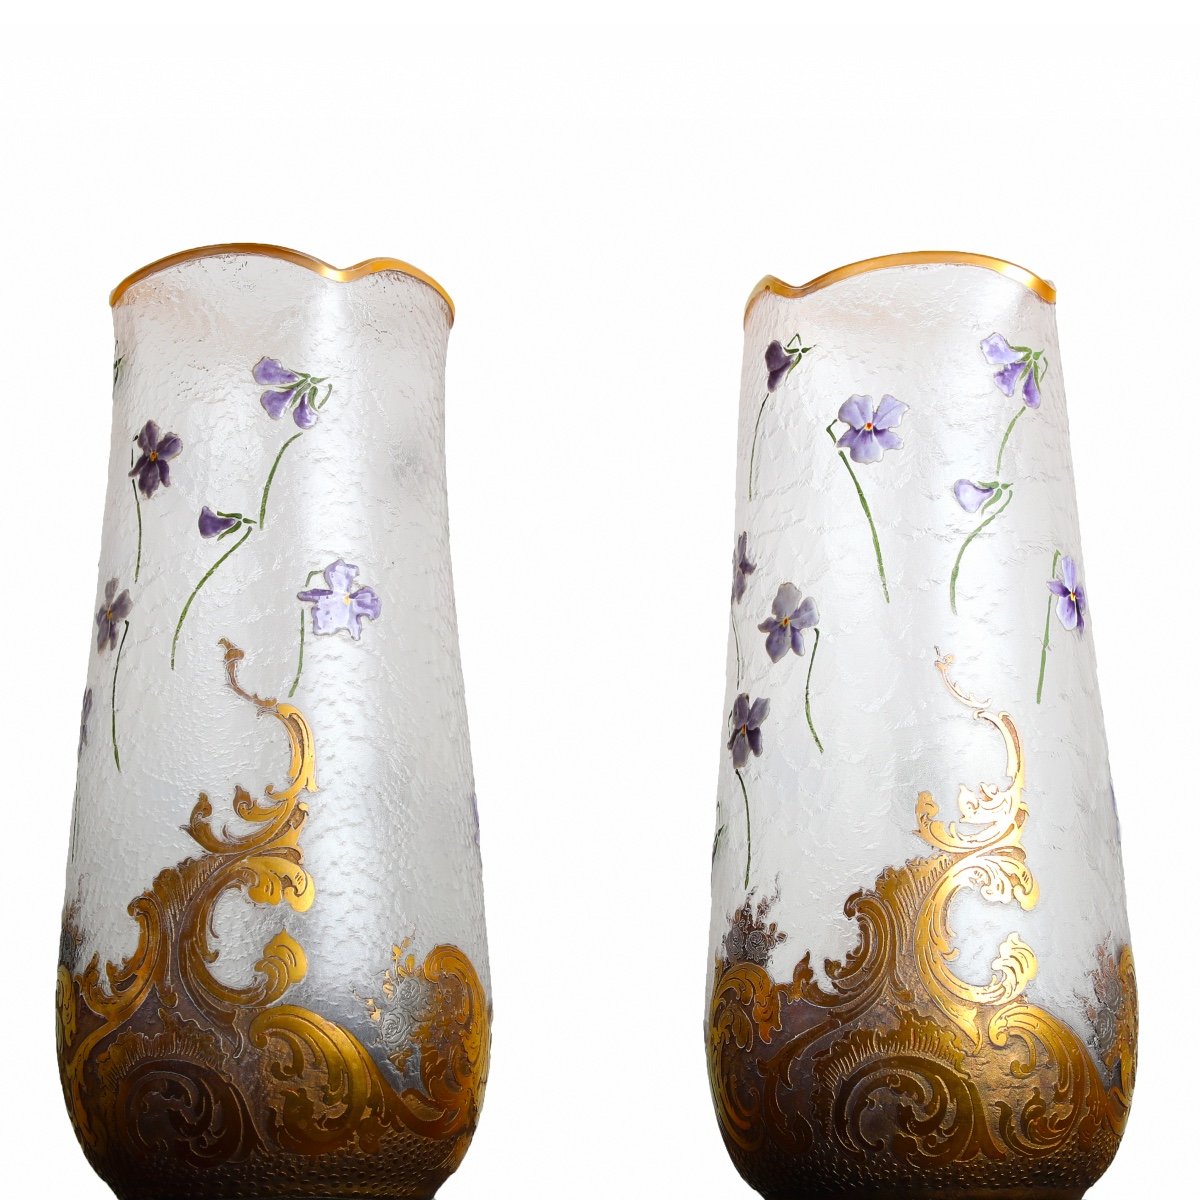 Pair Of Large Vases With Violets By Montjoye Legras 1900 - Art Nouveau